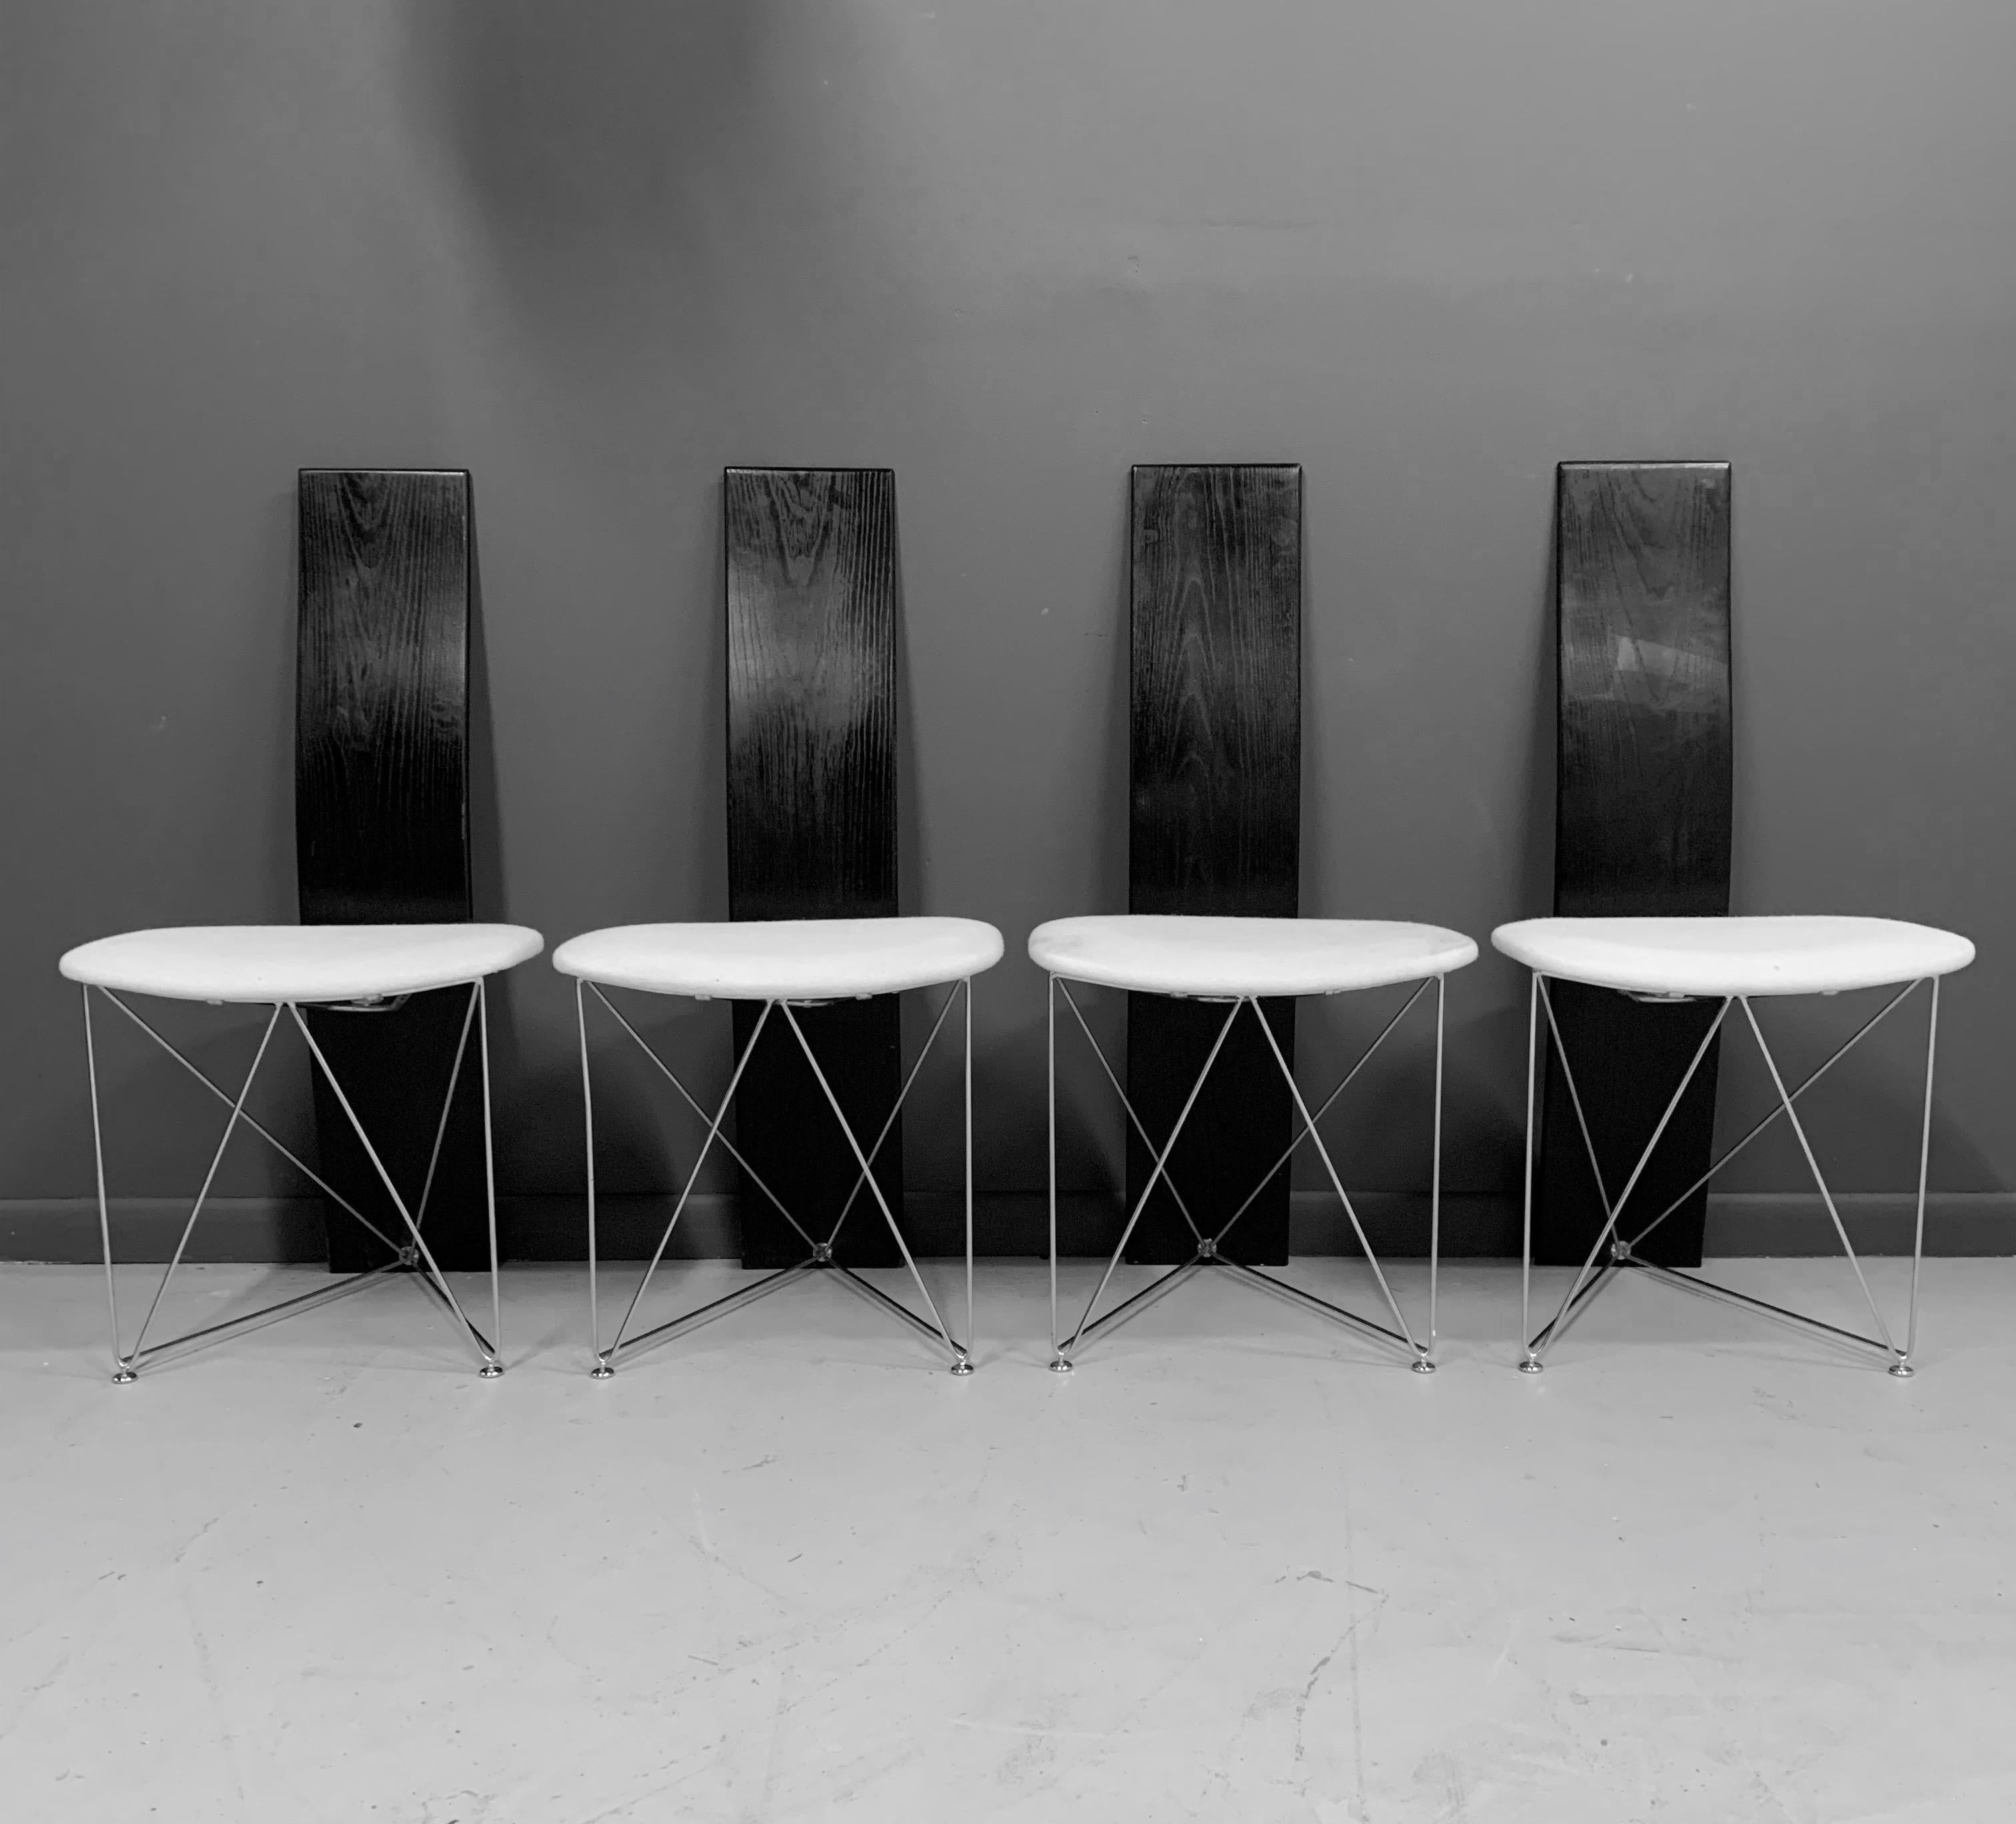 Dining chairs in the Postmodern style designed in Norway by Torstein Flatøy for the famed house of Bahus.